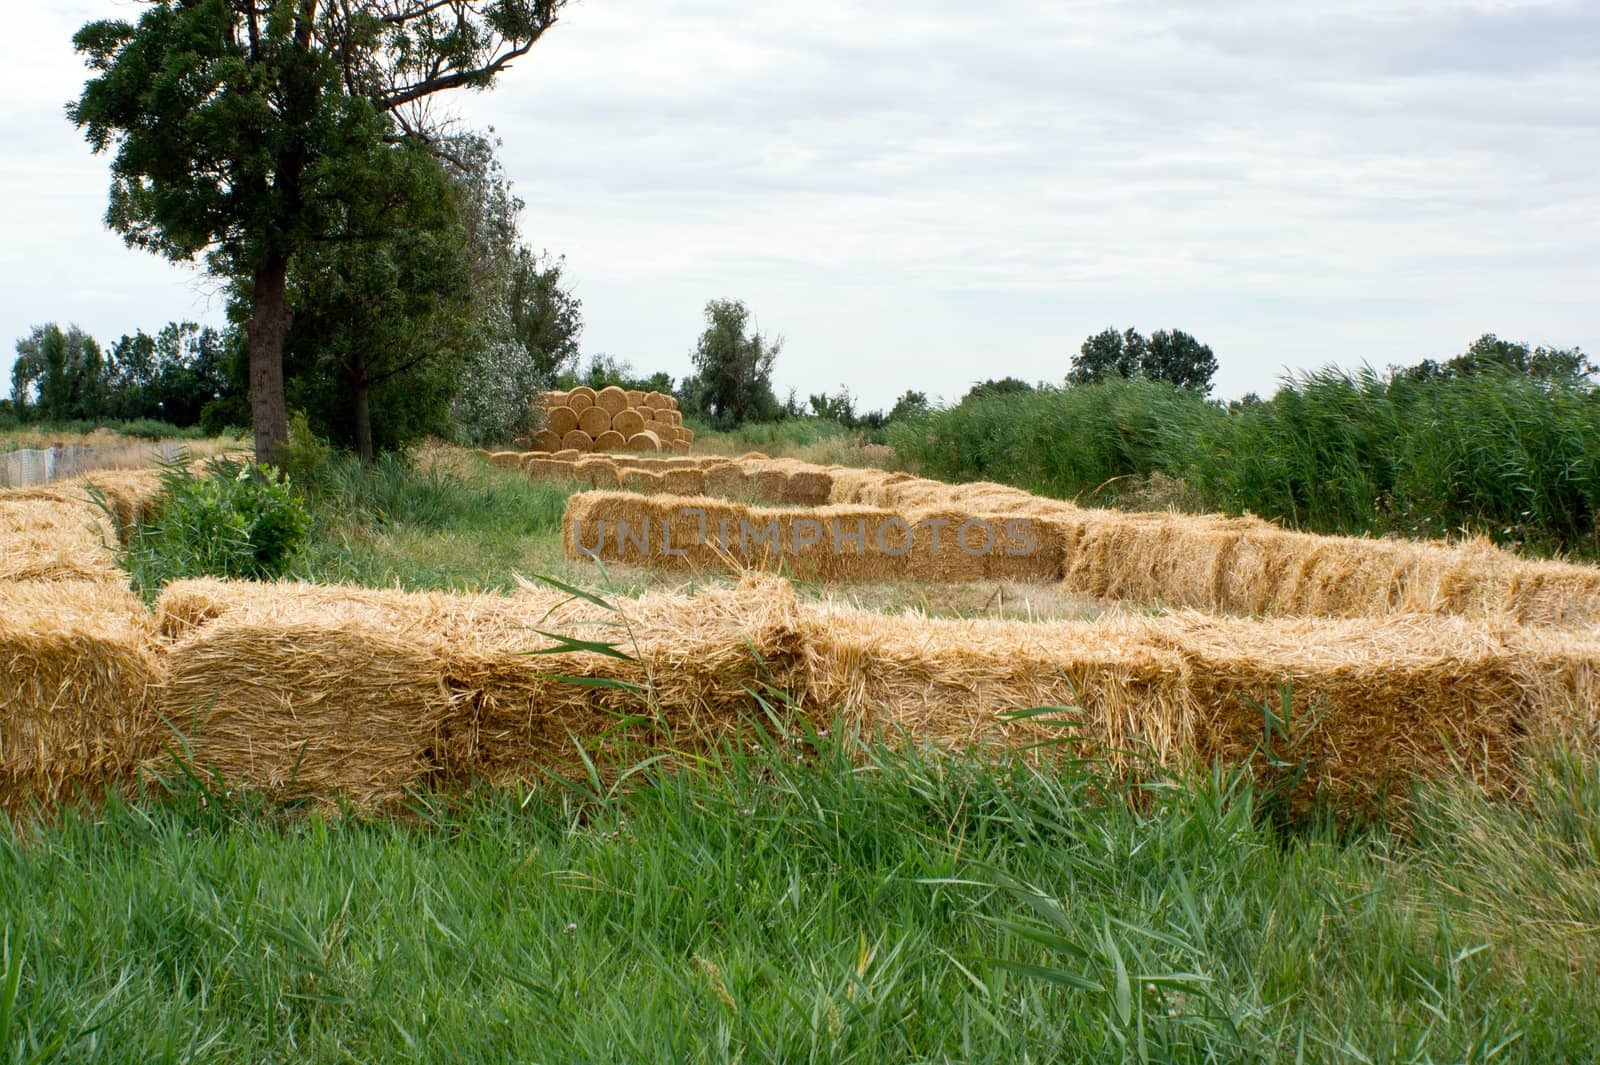 The large bales of straw stacked laid.